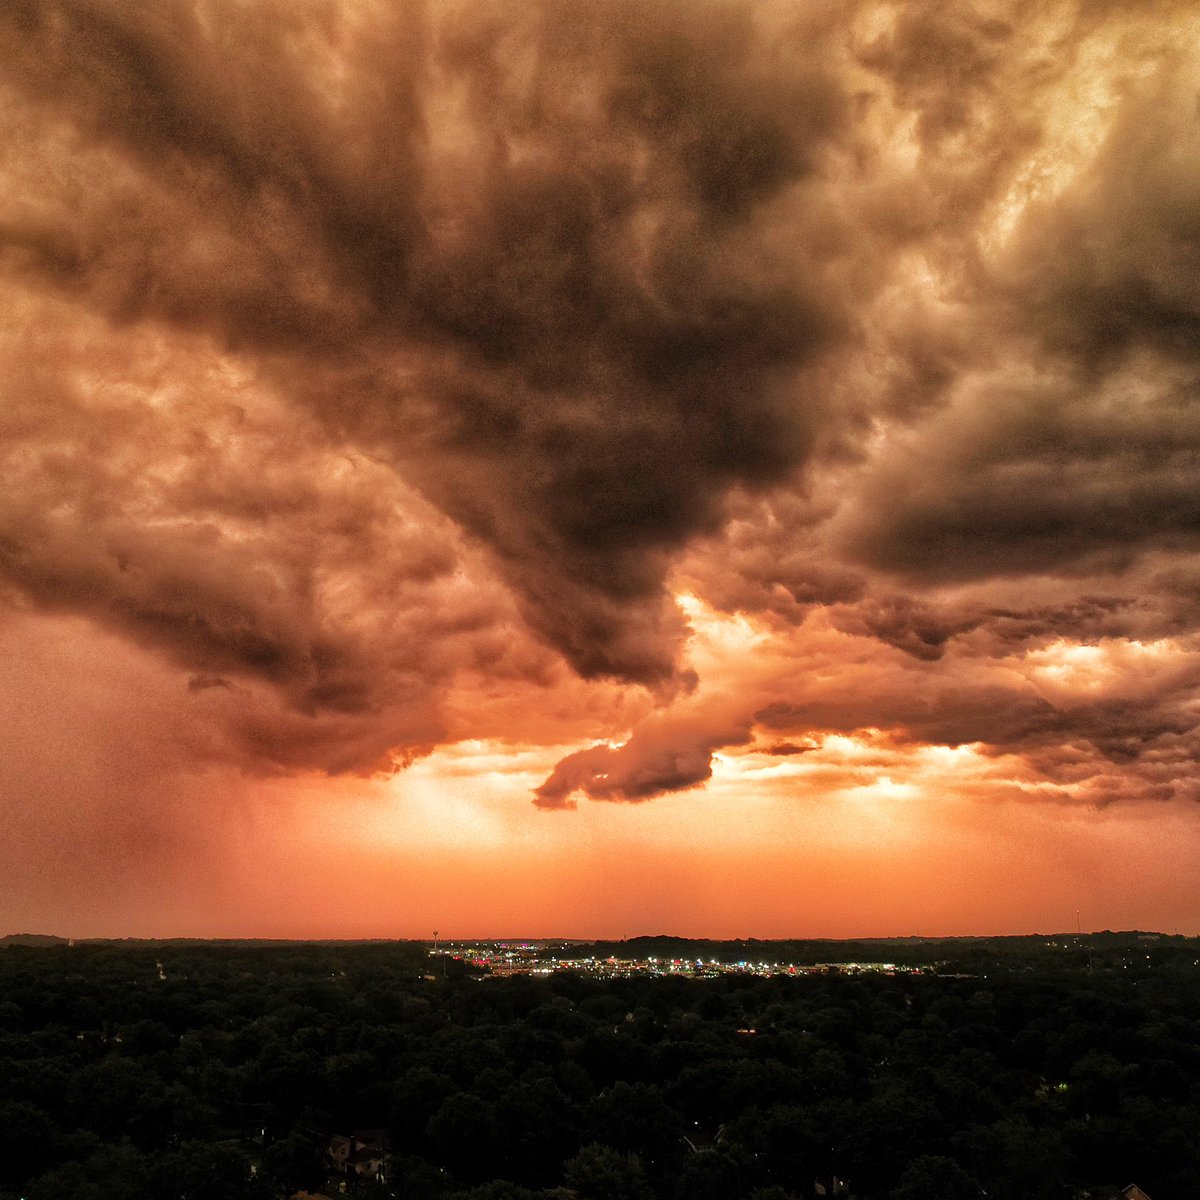 Incoming storm in cuyahoga falls @wkycweather @WEWS @MoonMan330 shot with #mavicair2s